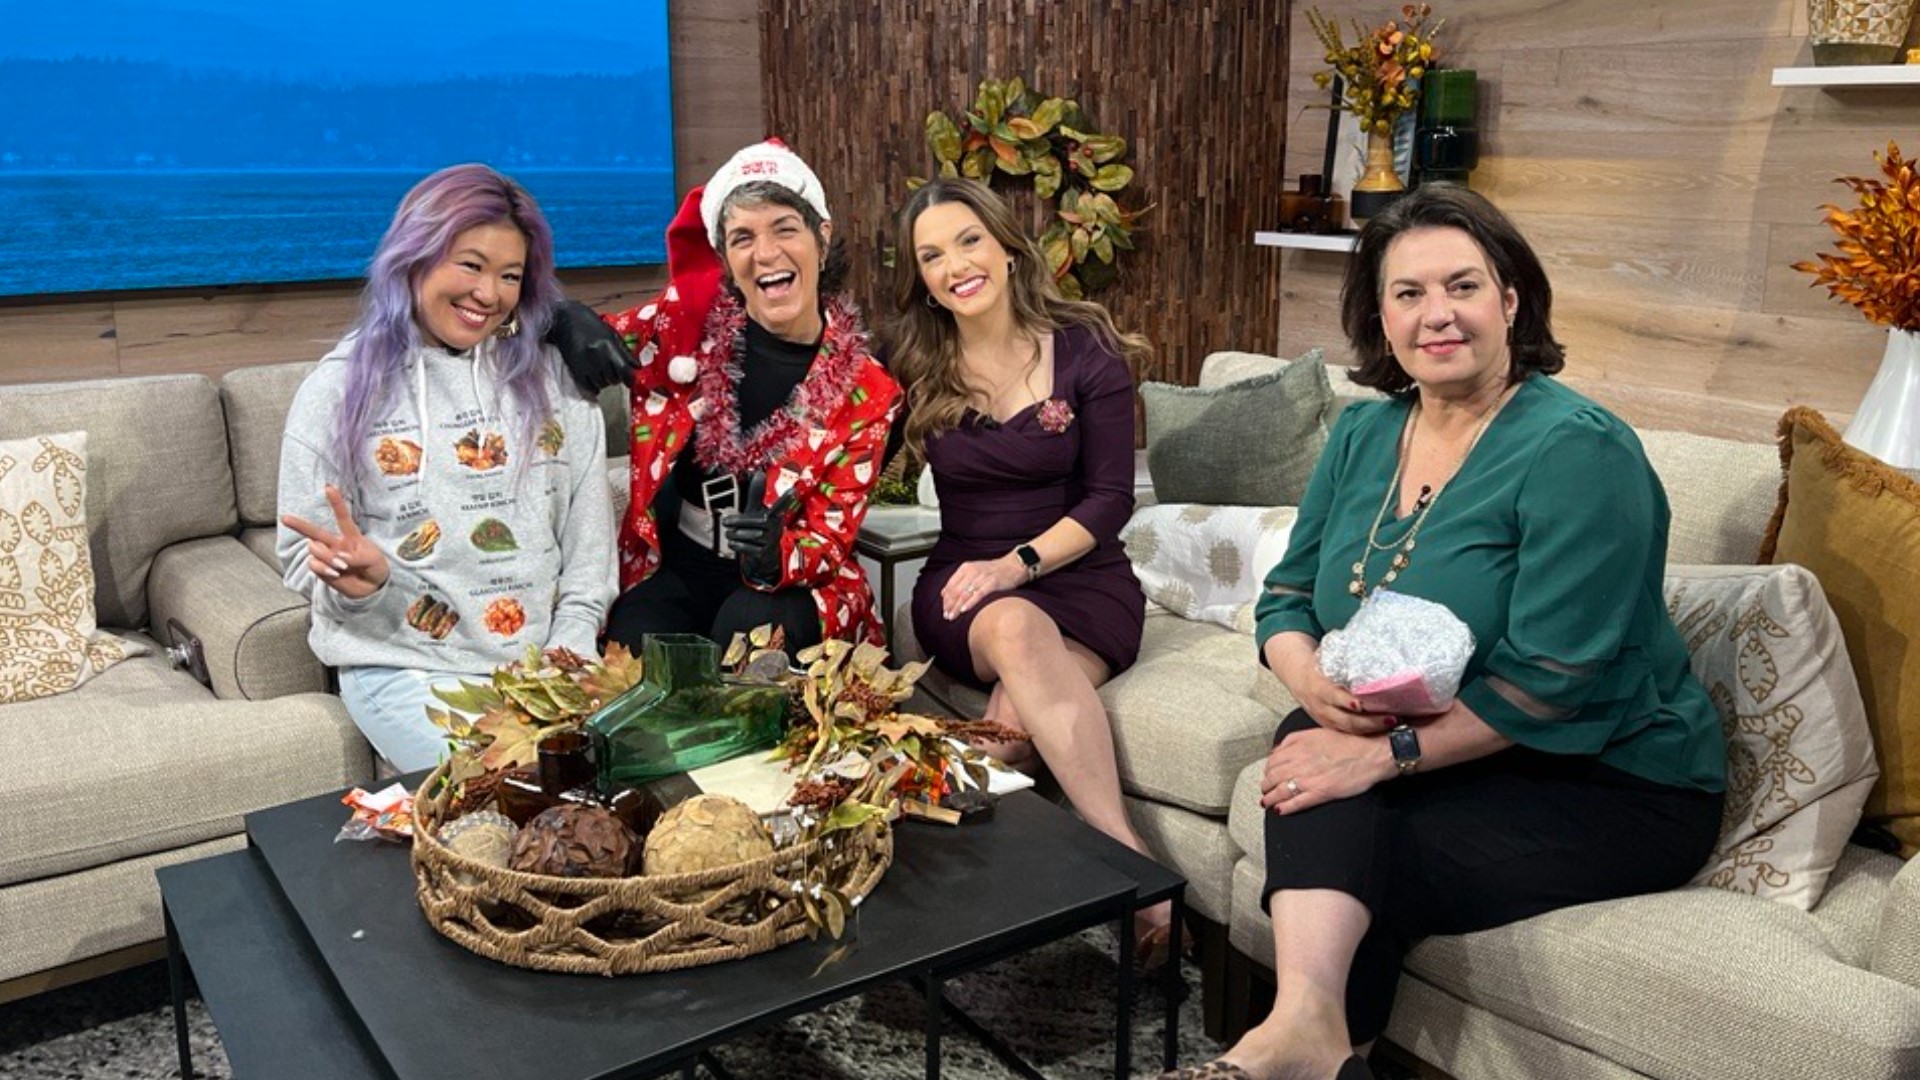 Amity is joined by WARM 106.9’s Shellie Hart, Comedian Ellen Acuario and New Day Producer Suzie Wiley to talk about the cost of Christmas trees and retail crime.